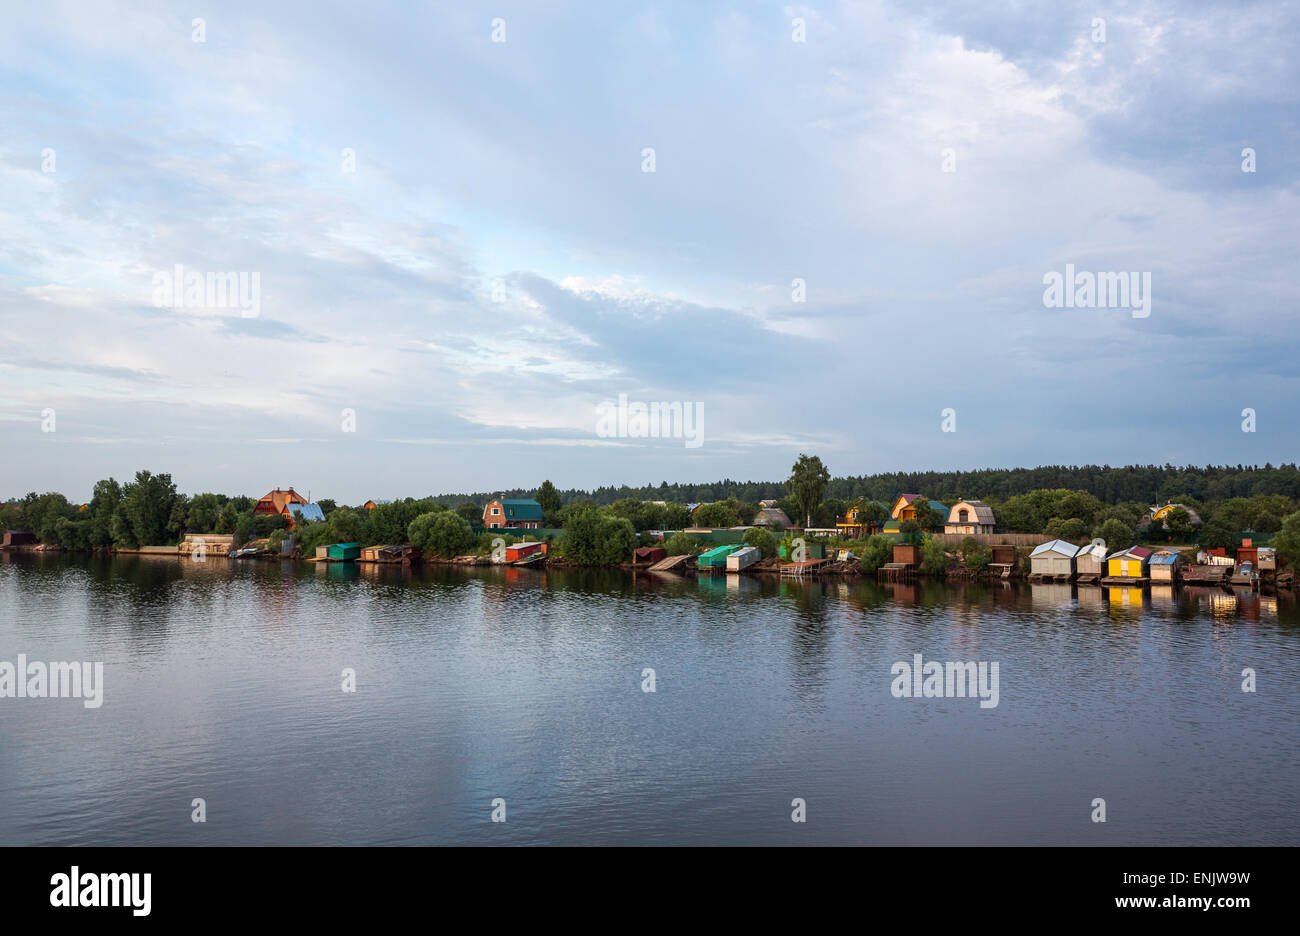 Russia, Kalyazin district, fields and farm houses seen from the Volga river Stock Photo